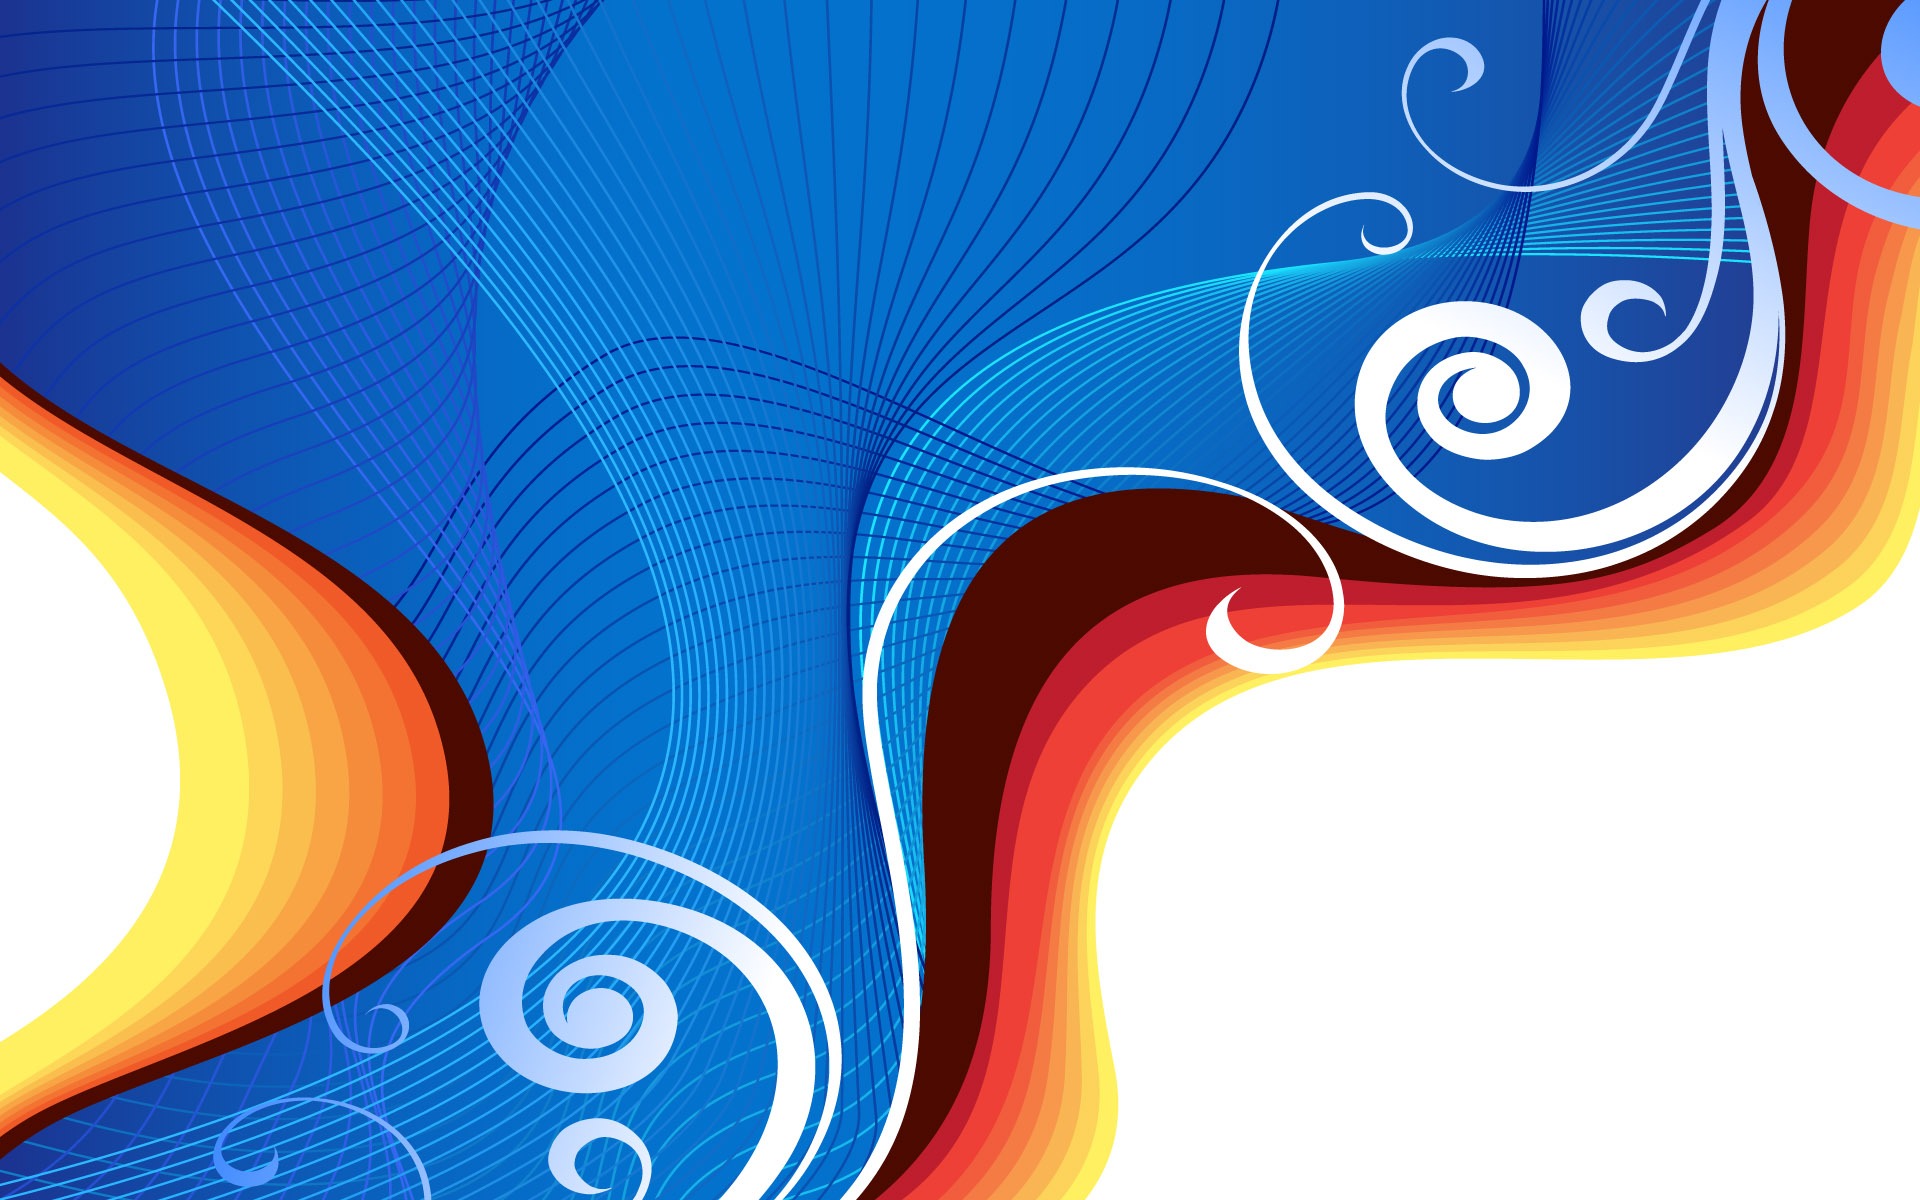 Colorful vector background wallpaper (4) #2 - 1920x1200